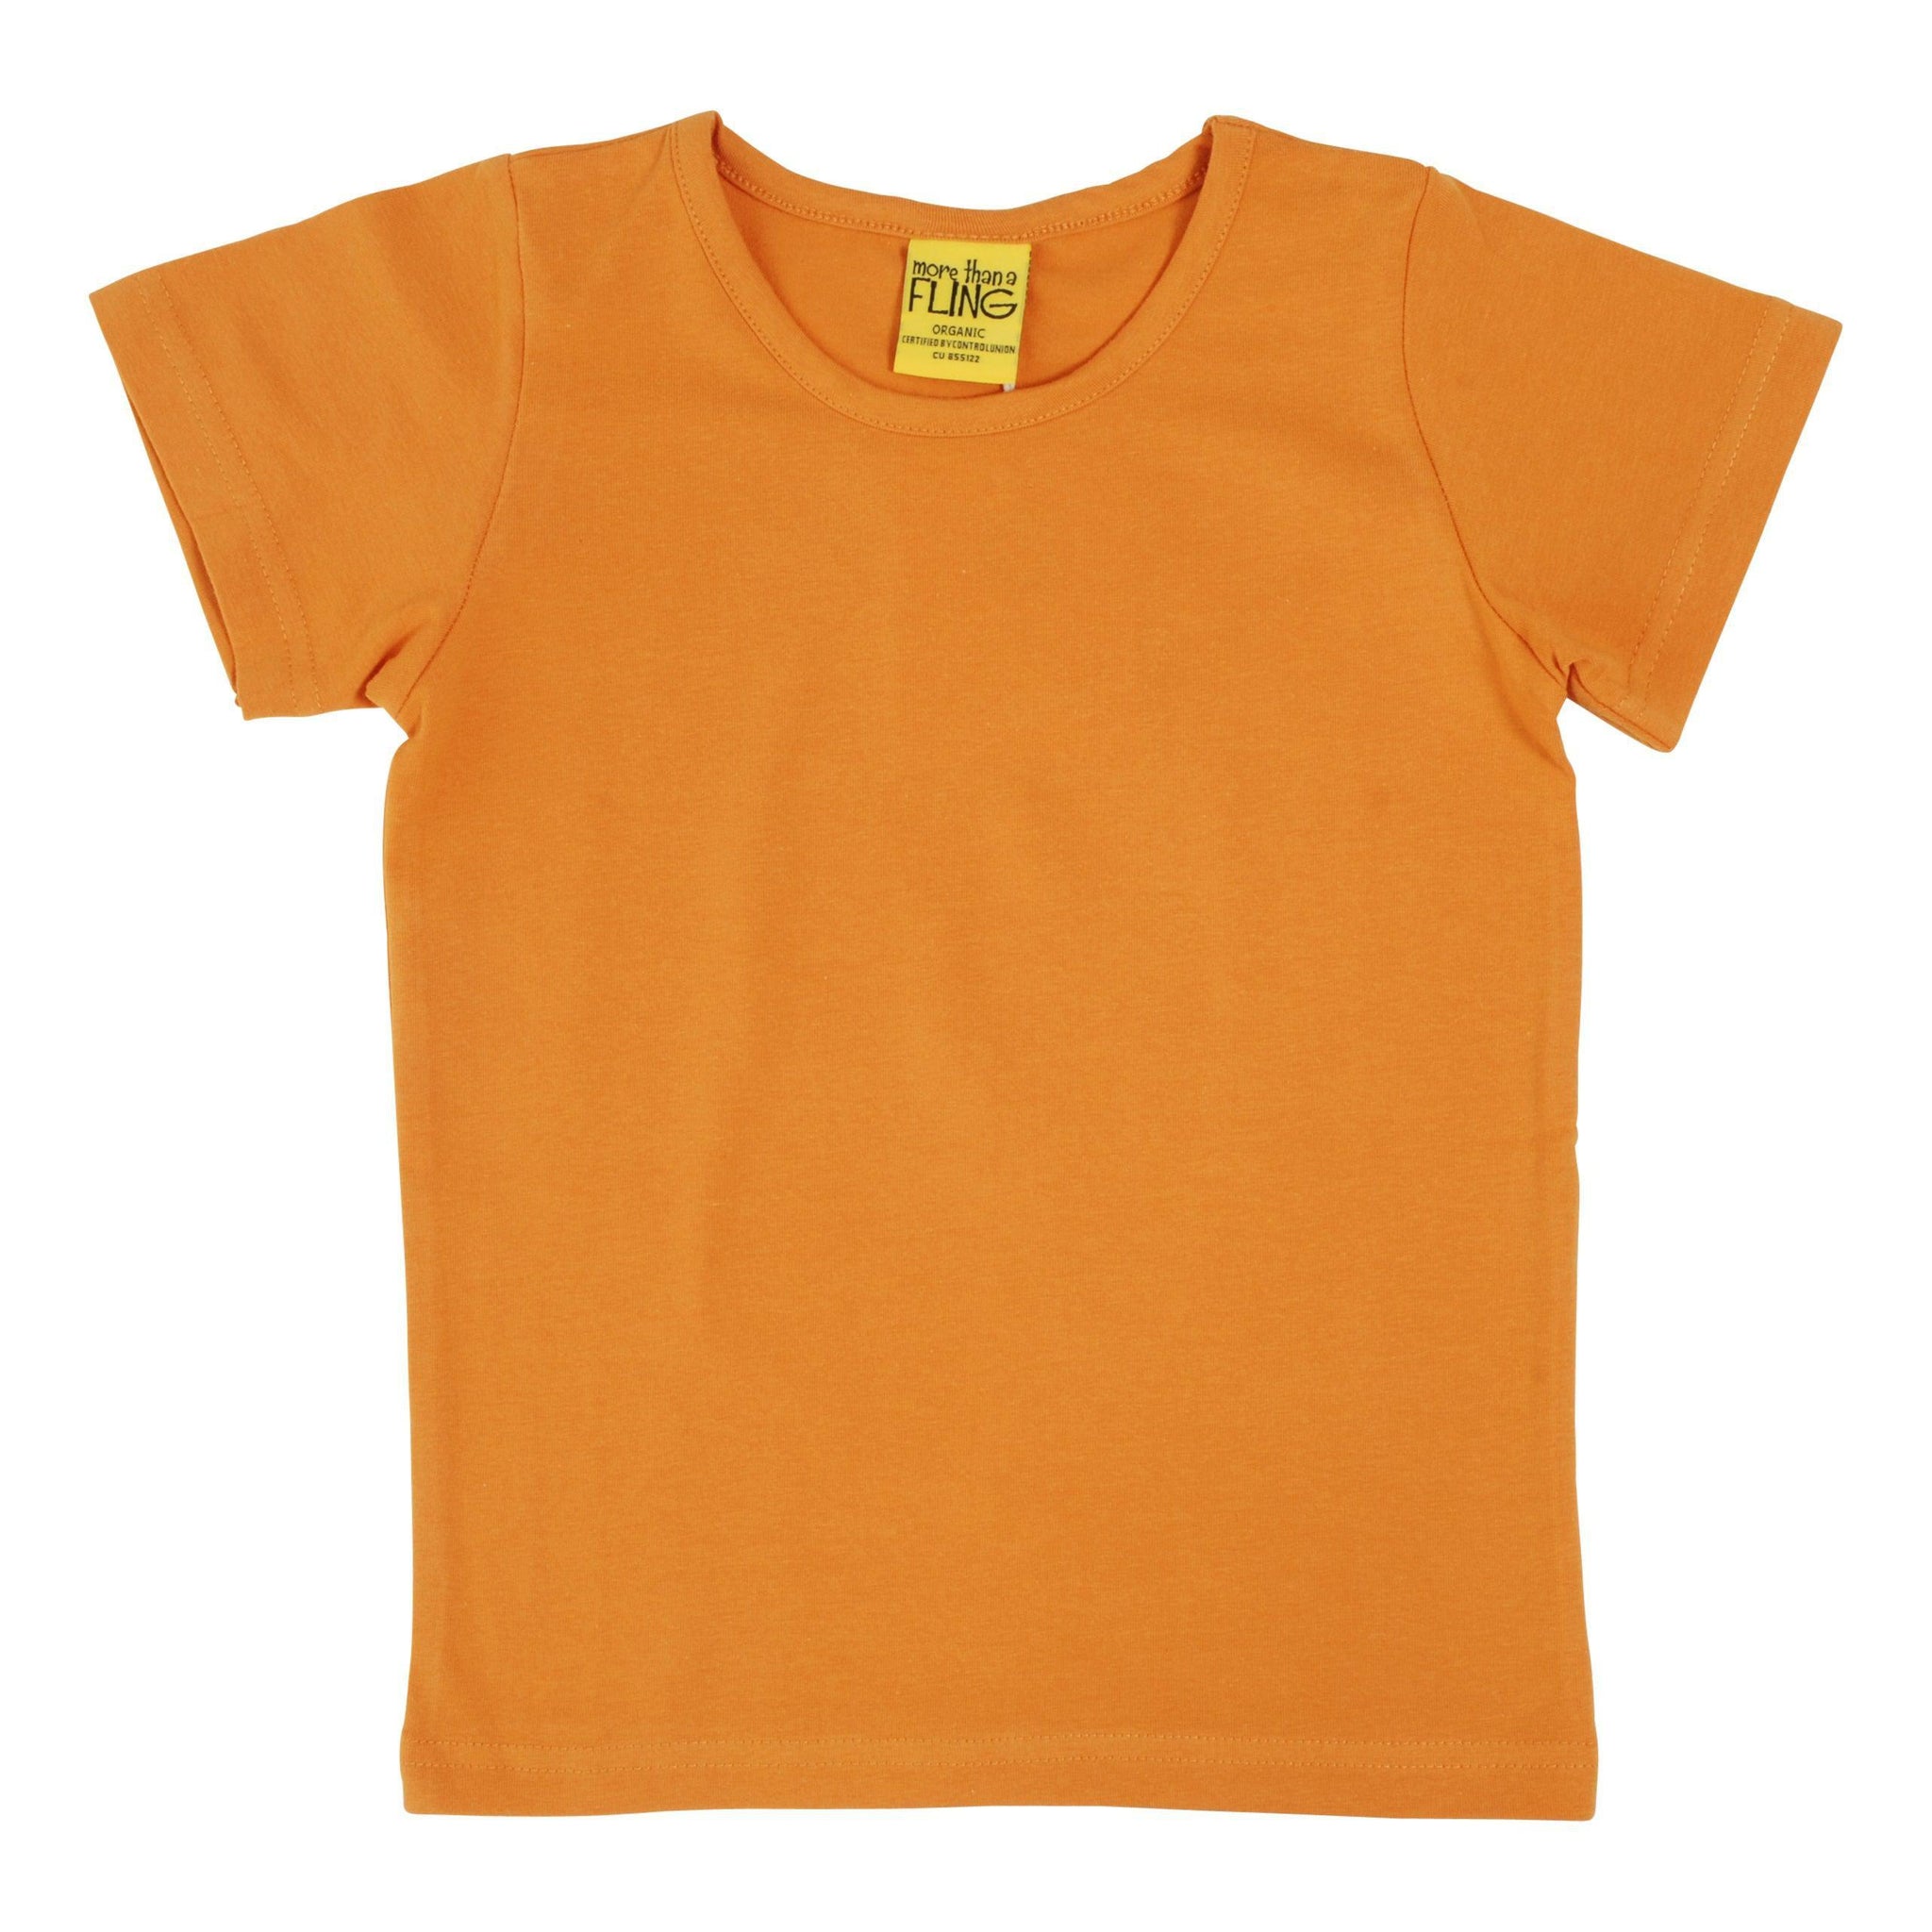 More Than A FLING - Yam Short Sleeved Top